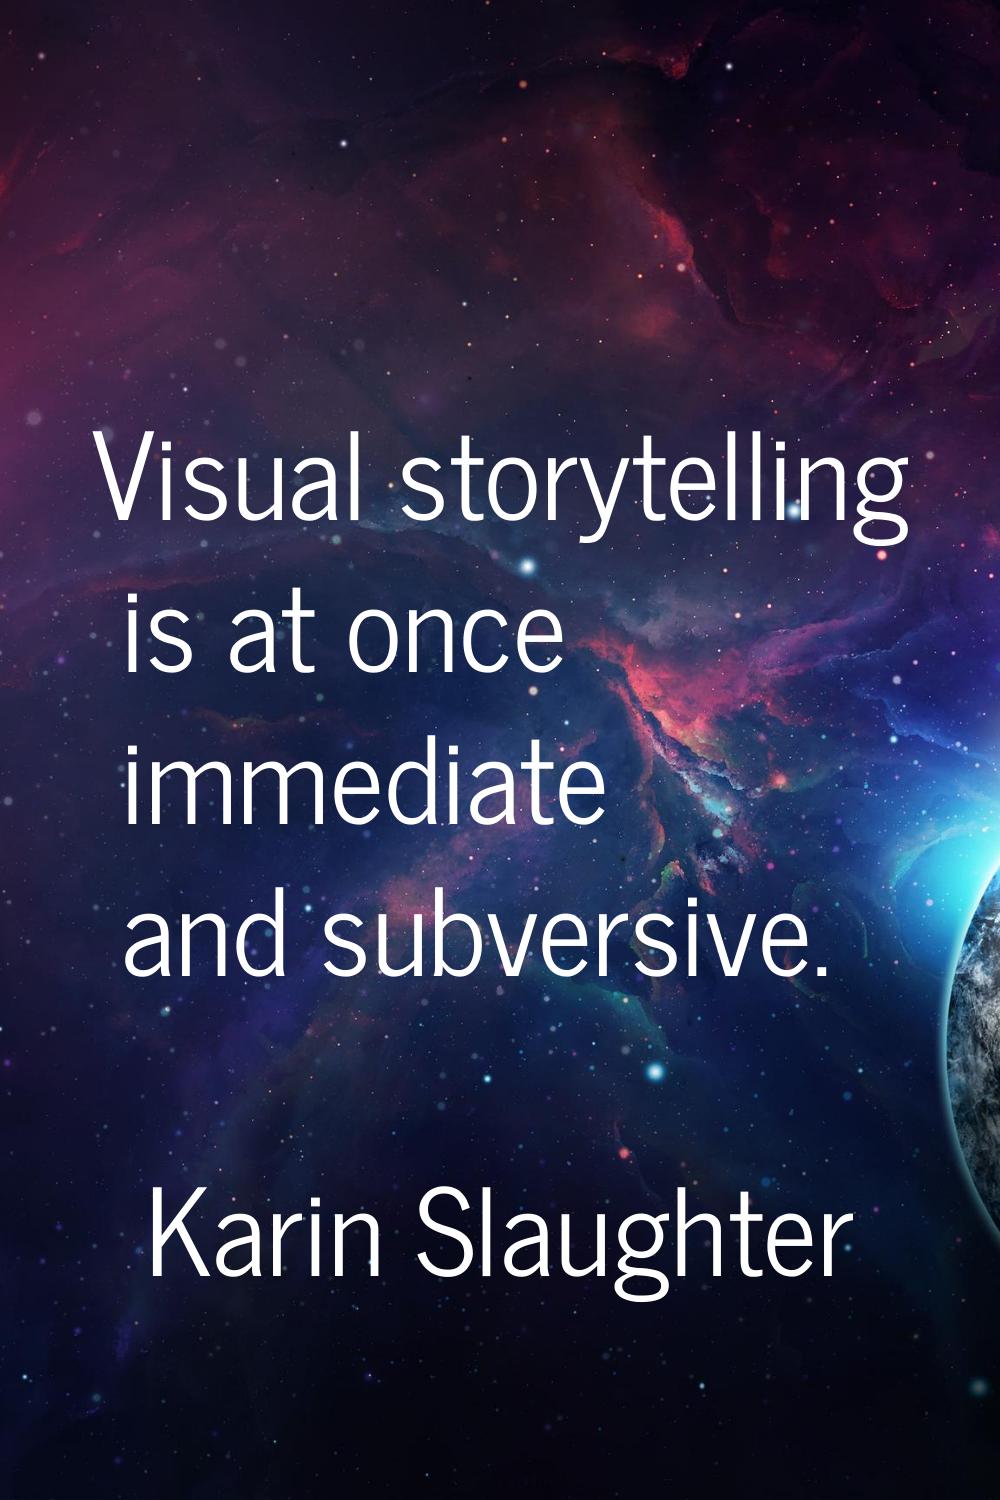 Visual storytelling is at once immediate and subversive.